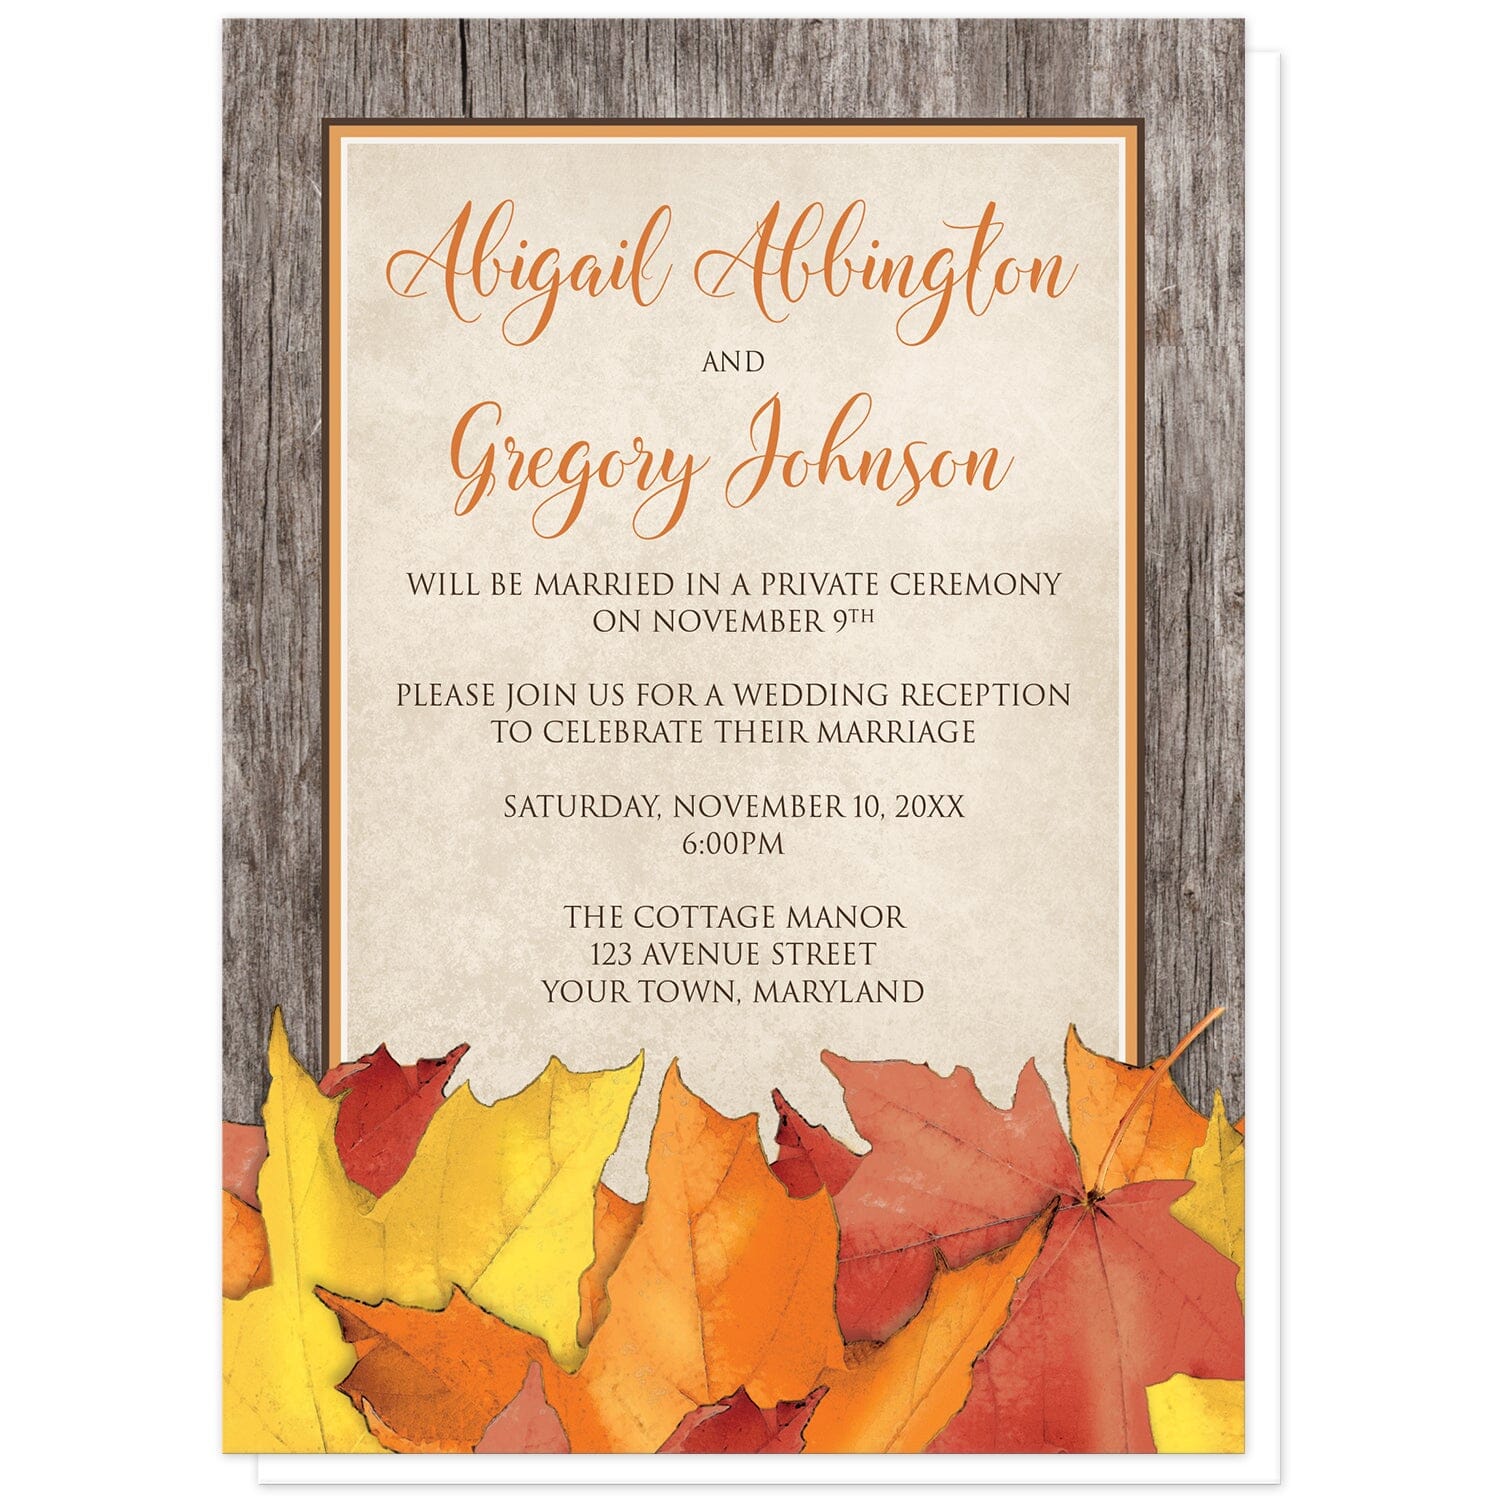 Rustic Wood and Leaves Fall Reception Only Invitations at Artistically Invited. Country-inspired rustic wood and leaves fall reception only invitations with an arrangement of rustic yellow, orange, and red autumn leaves along the bottom. Your personalized post-wedding reception details are custom printed in orange and brown over a beige parchment center frame area, outlined in orange and brown, with a brown wood border design. 